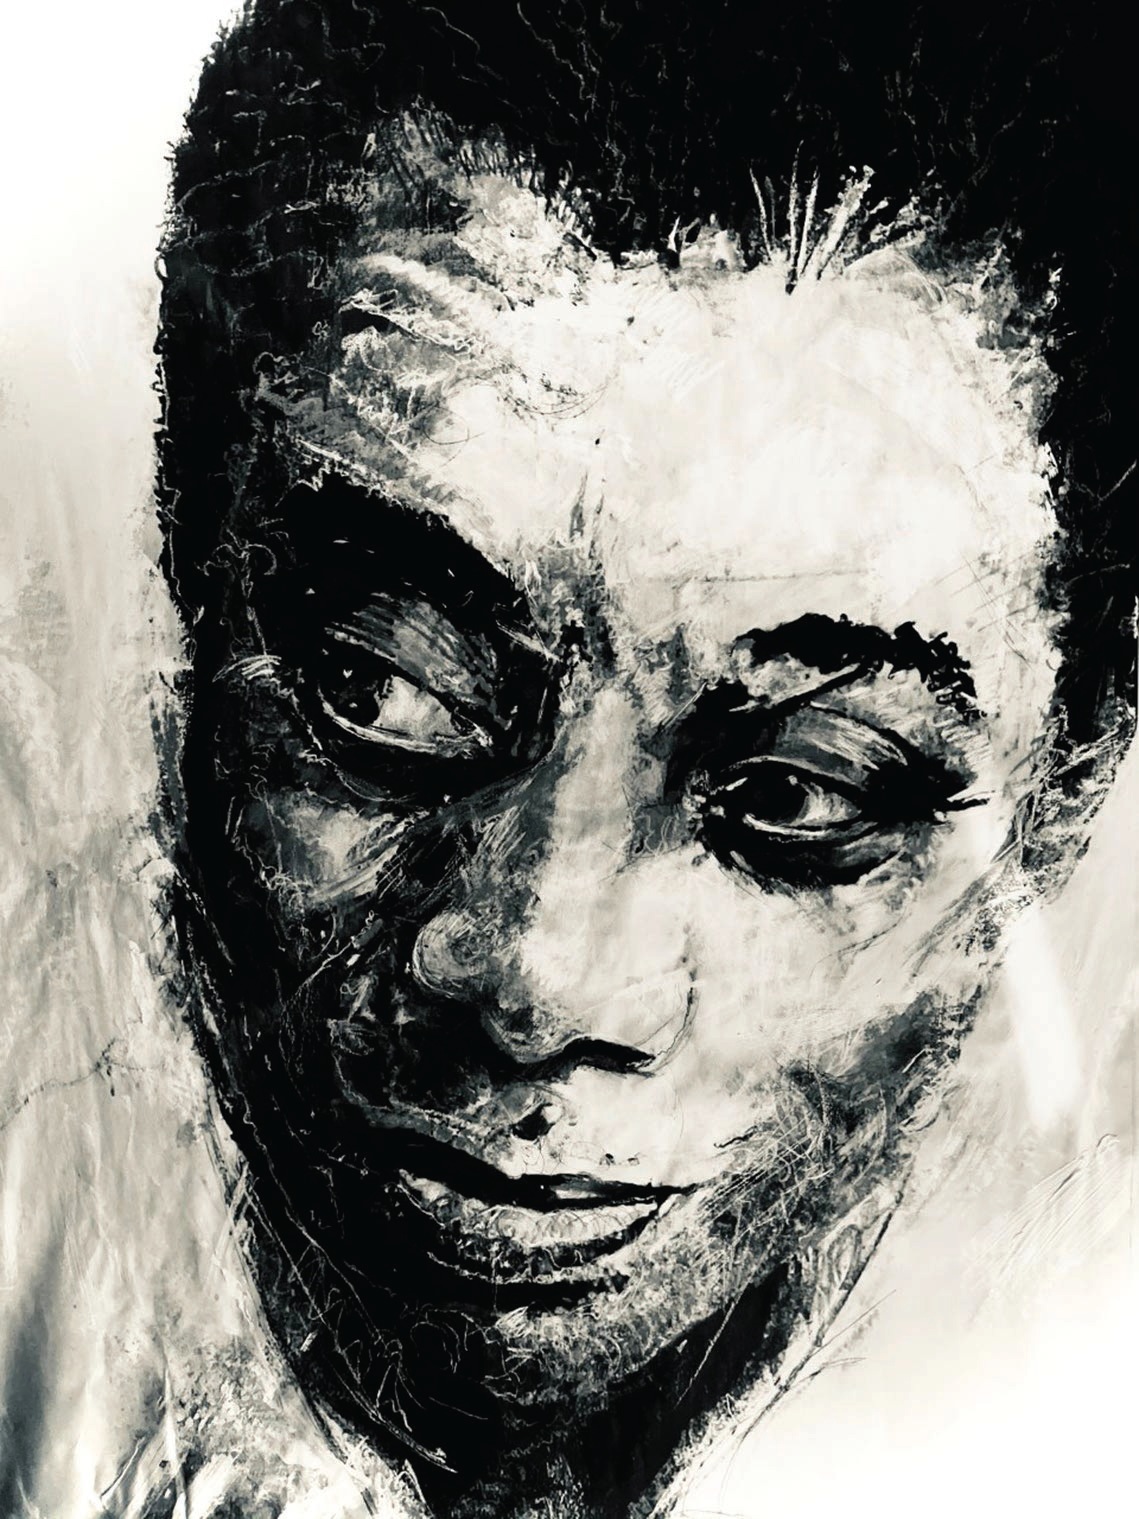 Gale Fulton Ross, “Writer James Baldwin” (2020) PHOTO COURTESY OF THE ARTIST